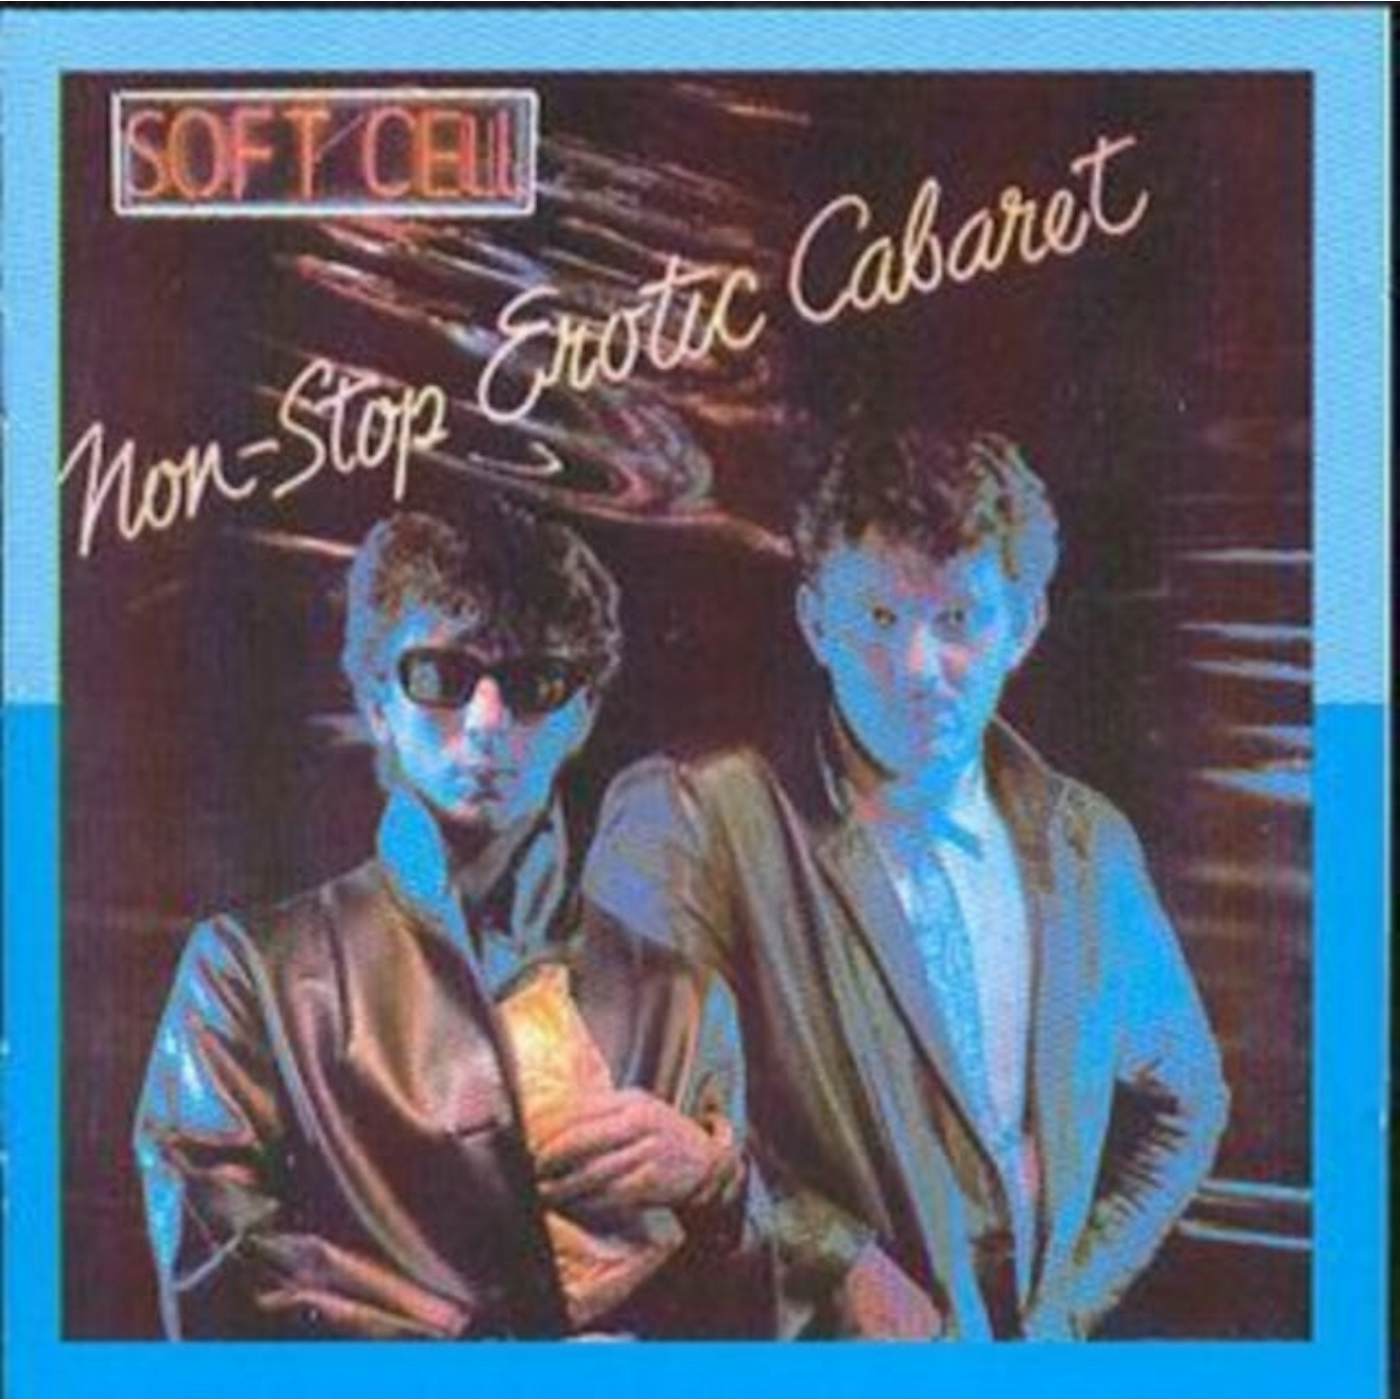 Soft Cell CD - Non-Stop Erotic Cabaret